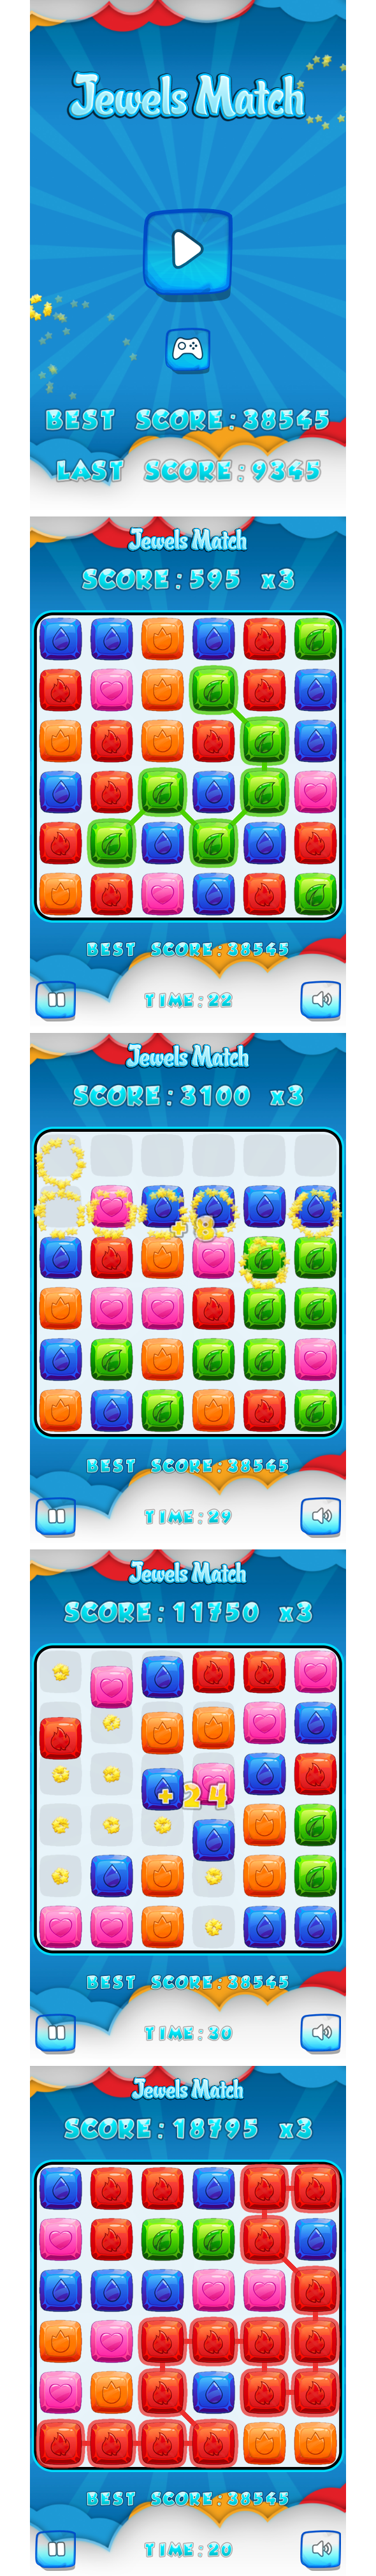 Jewels Match - HTML5 Game + Mobile + AdMob (Construct 3 | Construct 2 | Capx) - 3